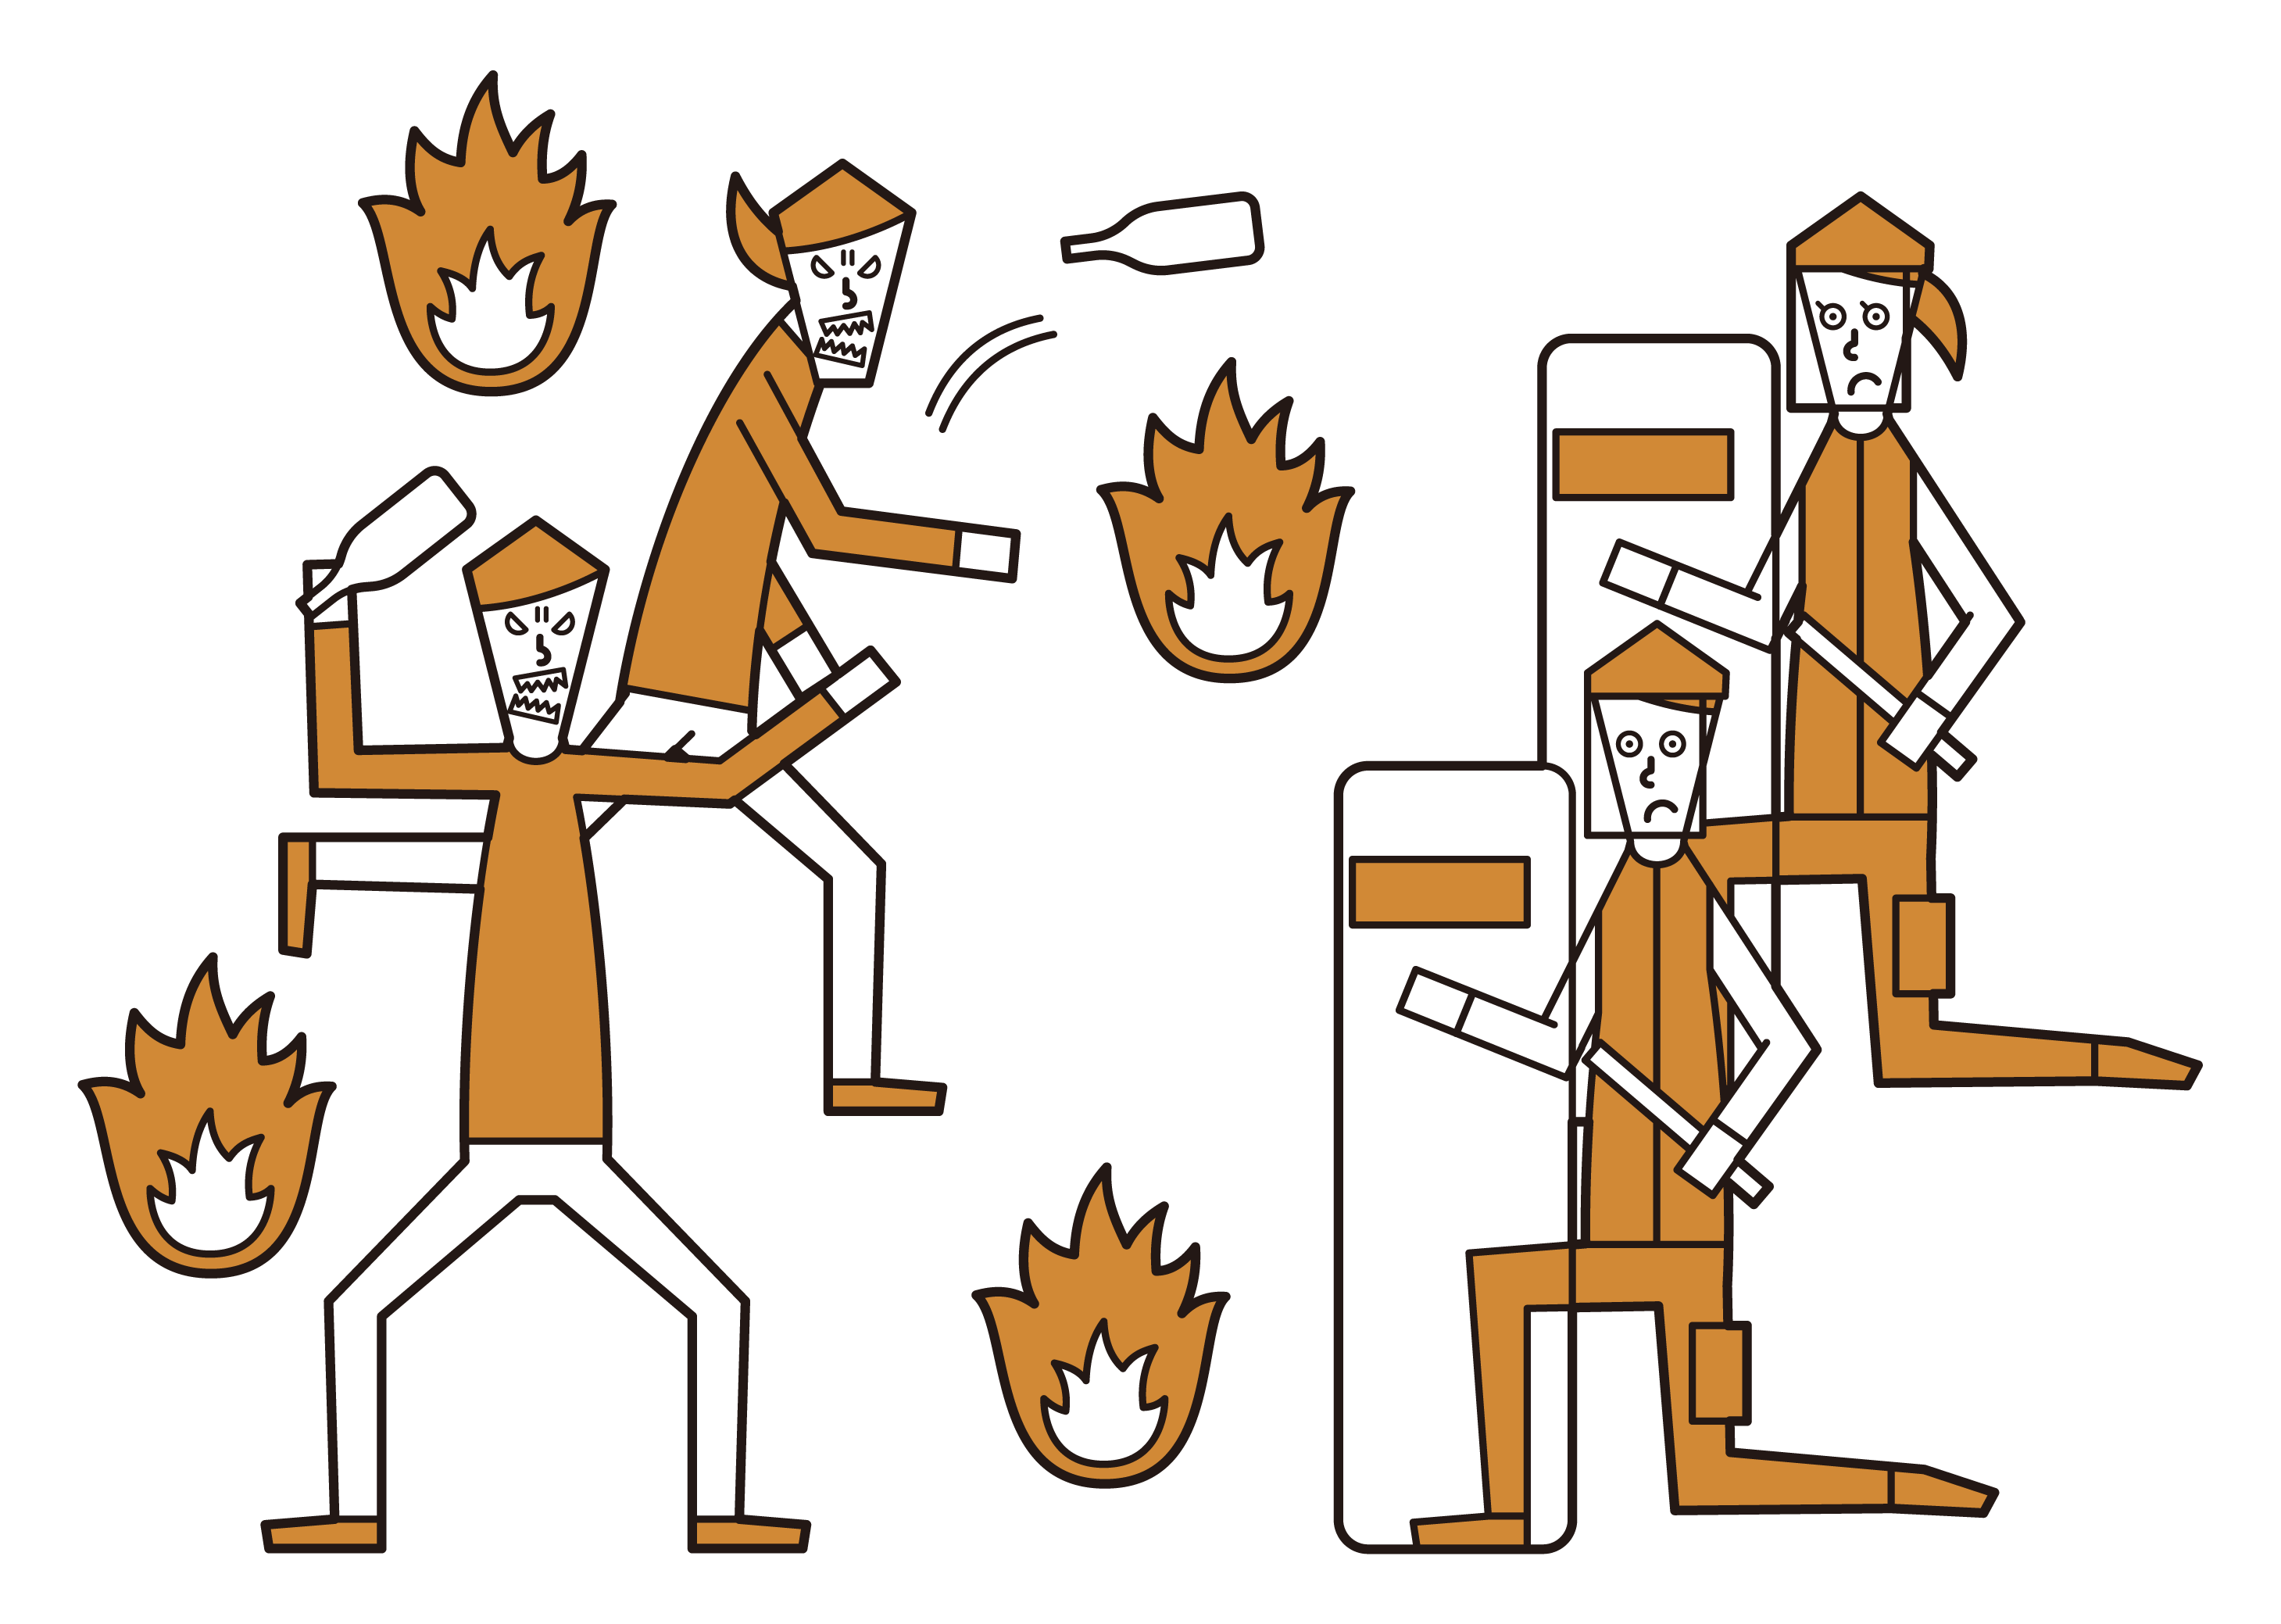 Illustration of a mob-turned-protester